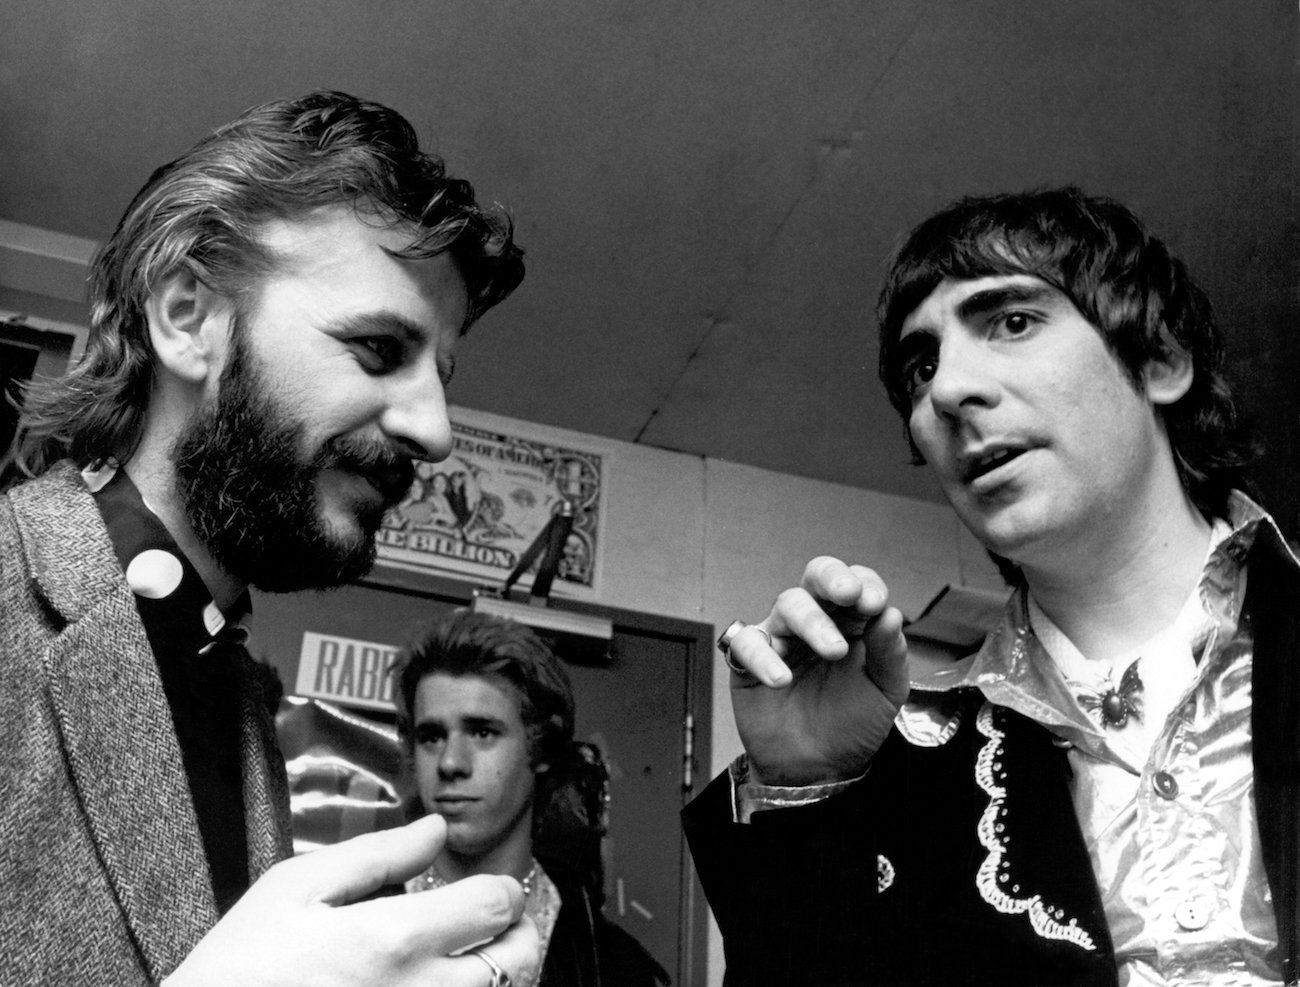 Ringo Starr and Keith Moon hanging out together in 1974.